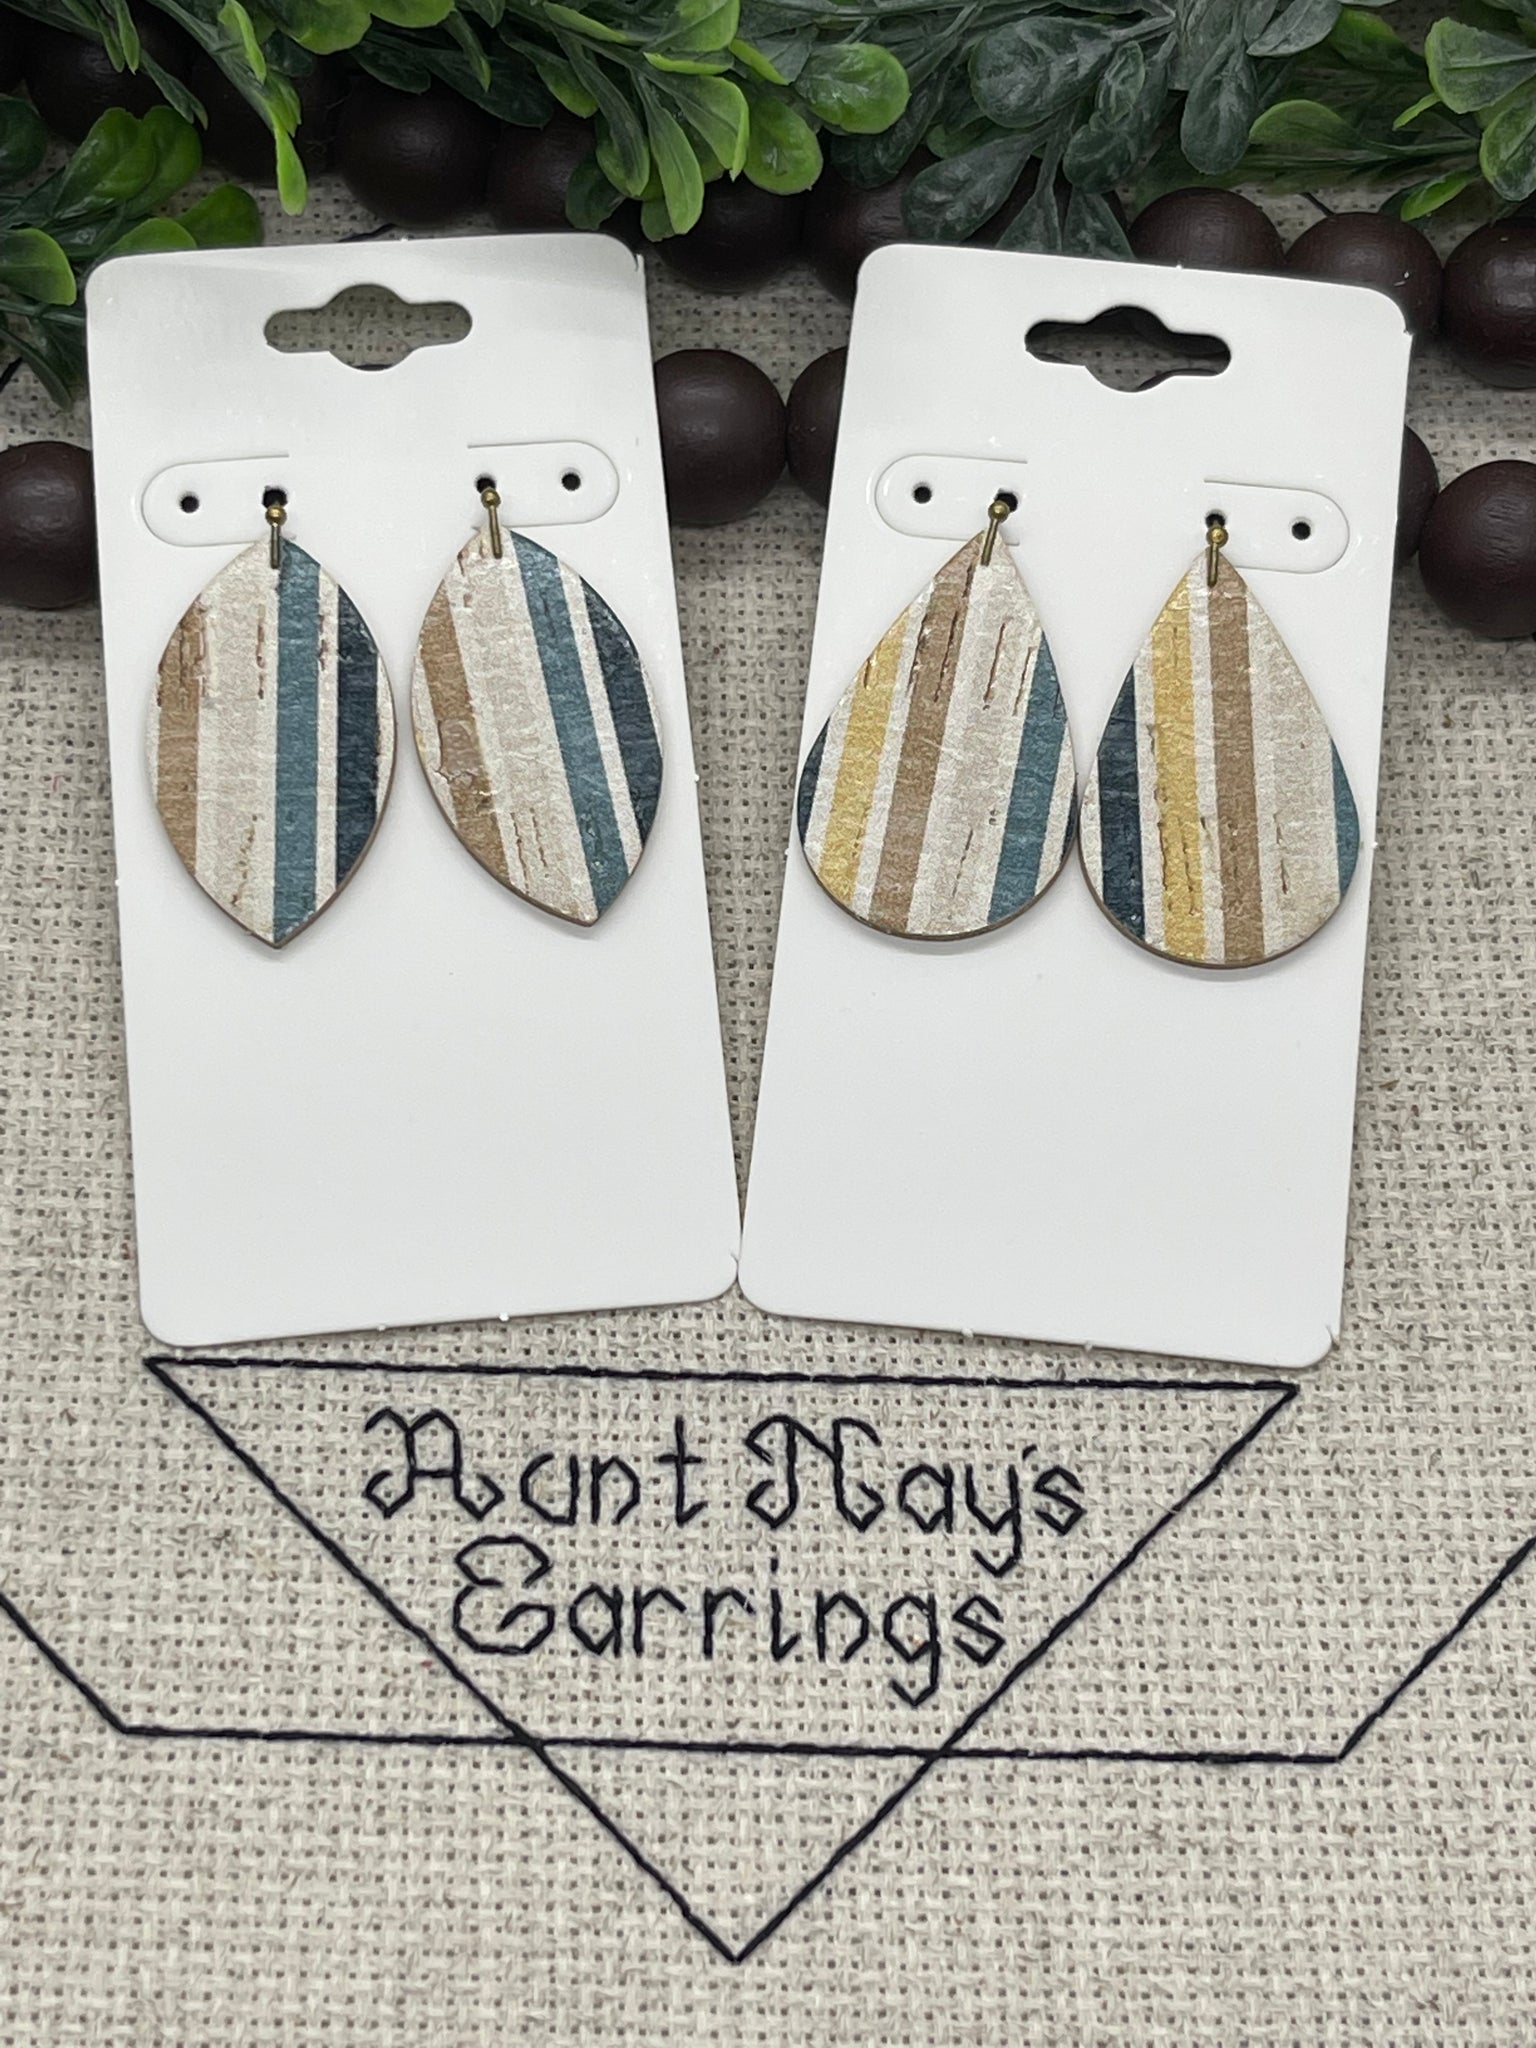 Denim Blues and Mustard Yellow Stripes on Creamy White Cork on Leather Earrings